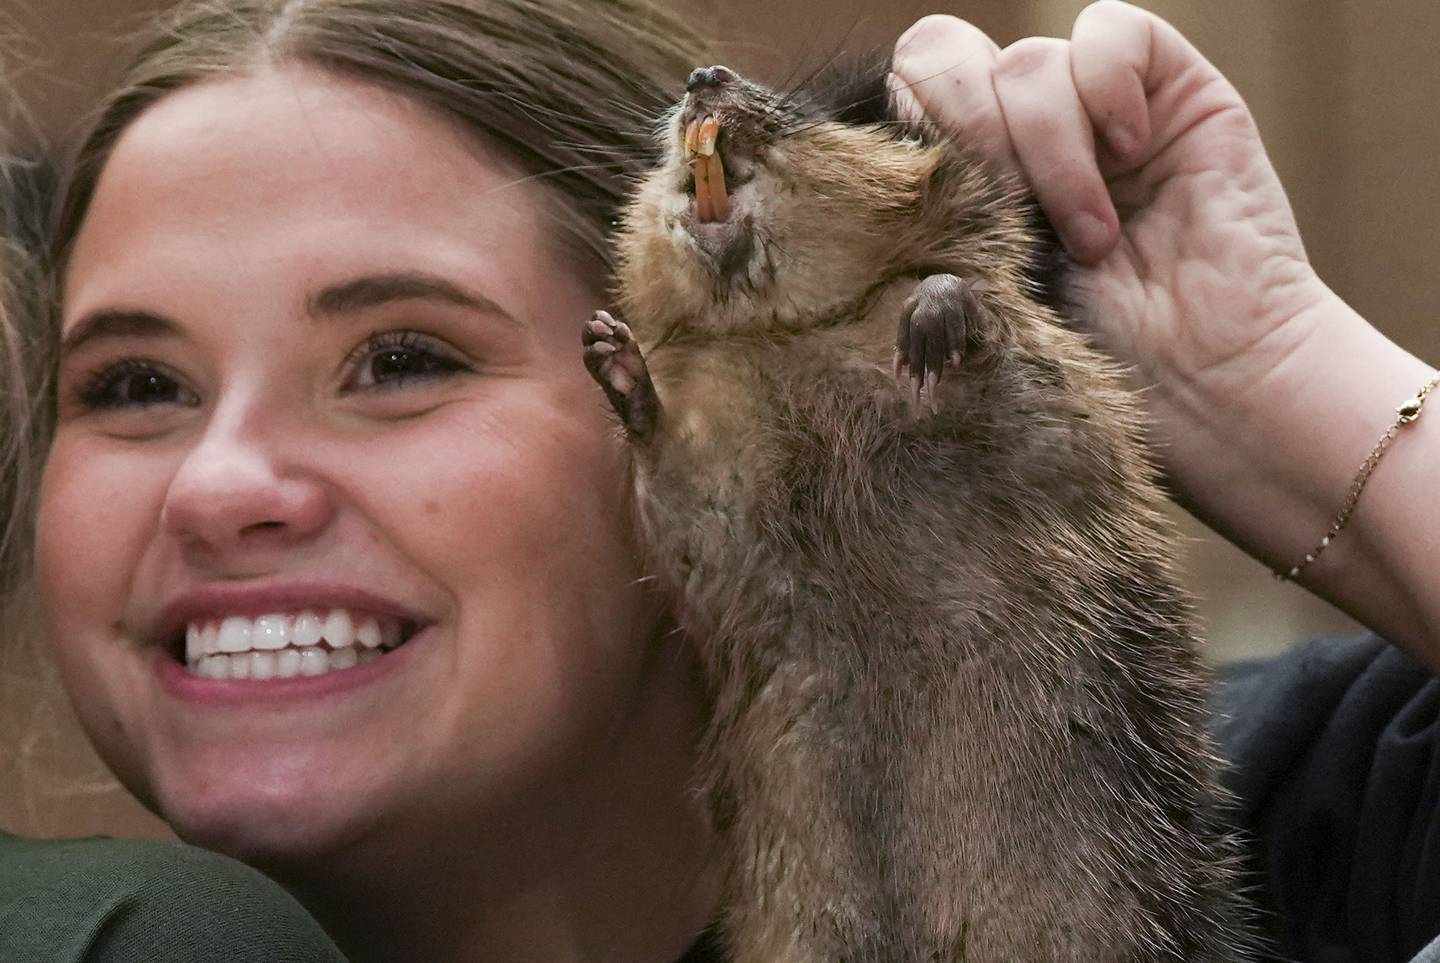 Cesilee Oliver, 18, Miss Cameron Parrish 2022 from Cameron Parrish, LA holds up a fresh muskrat before skinning it at The National Outdoors Show in Dorchester County, MD on February 25, 2023.